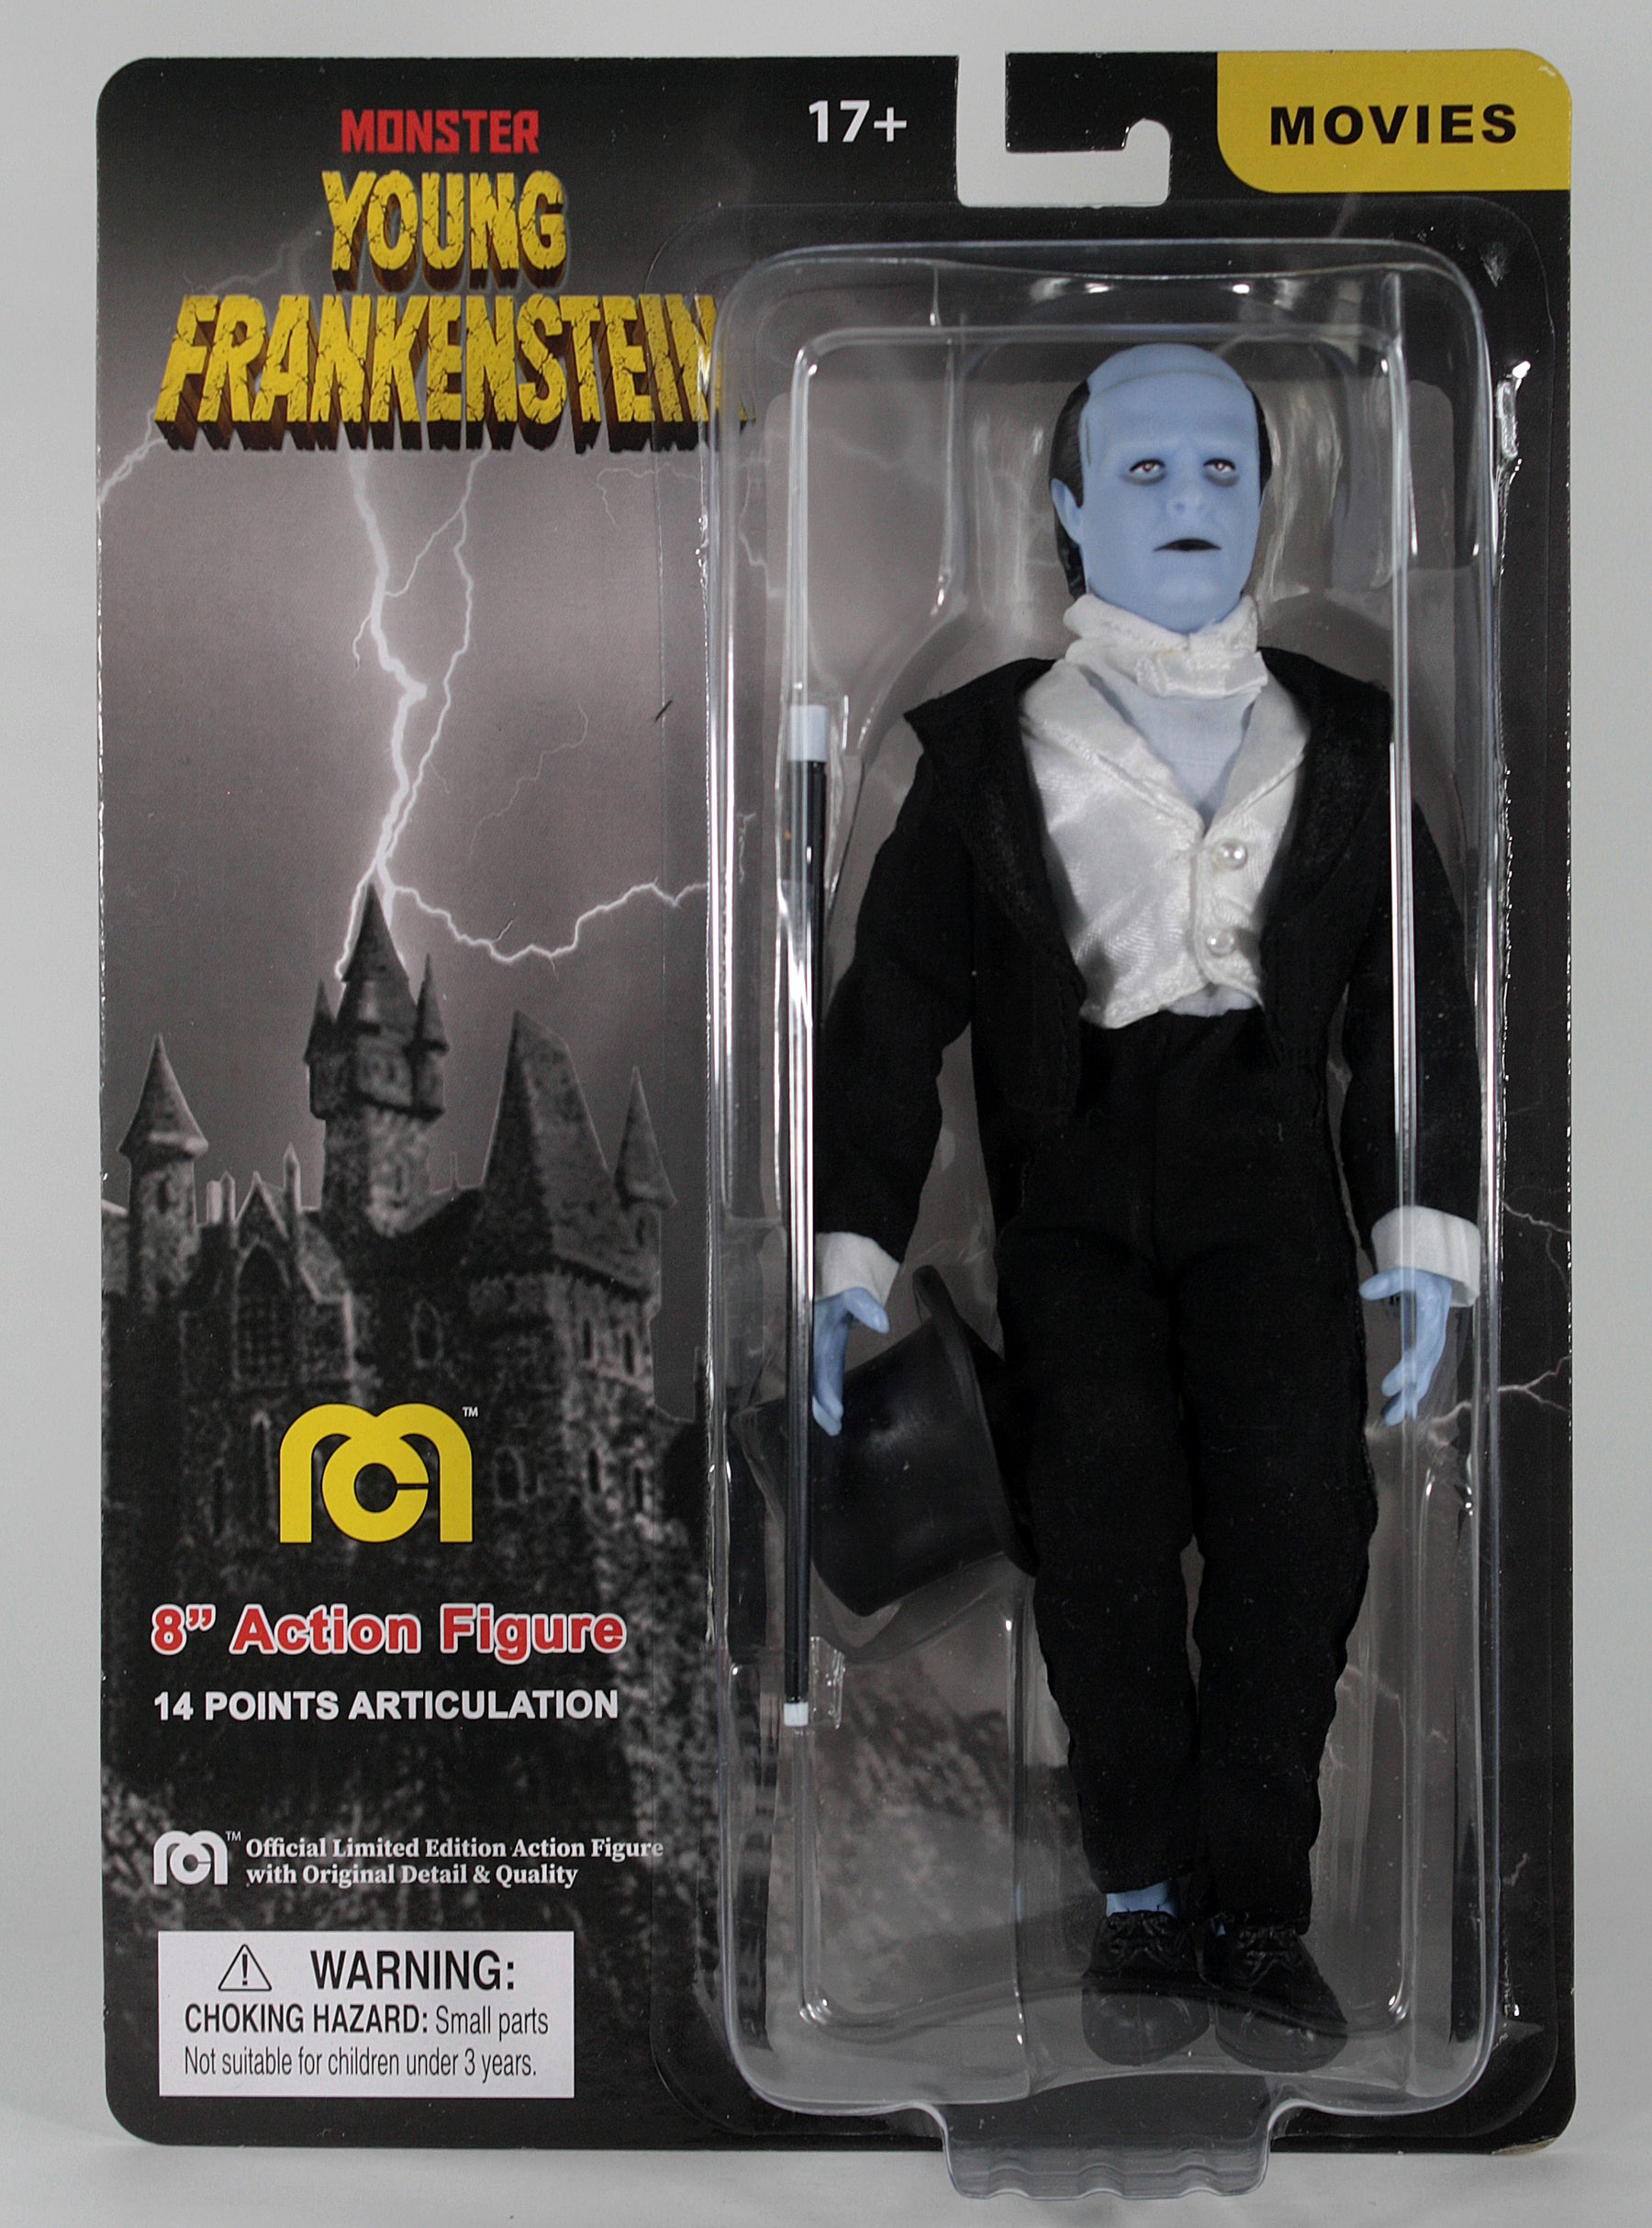 Mego Movies Wave 14 - Young Frankenstein's Monster 8" Action Figure